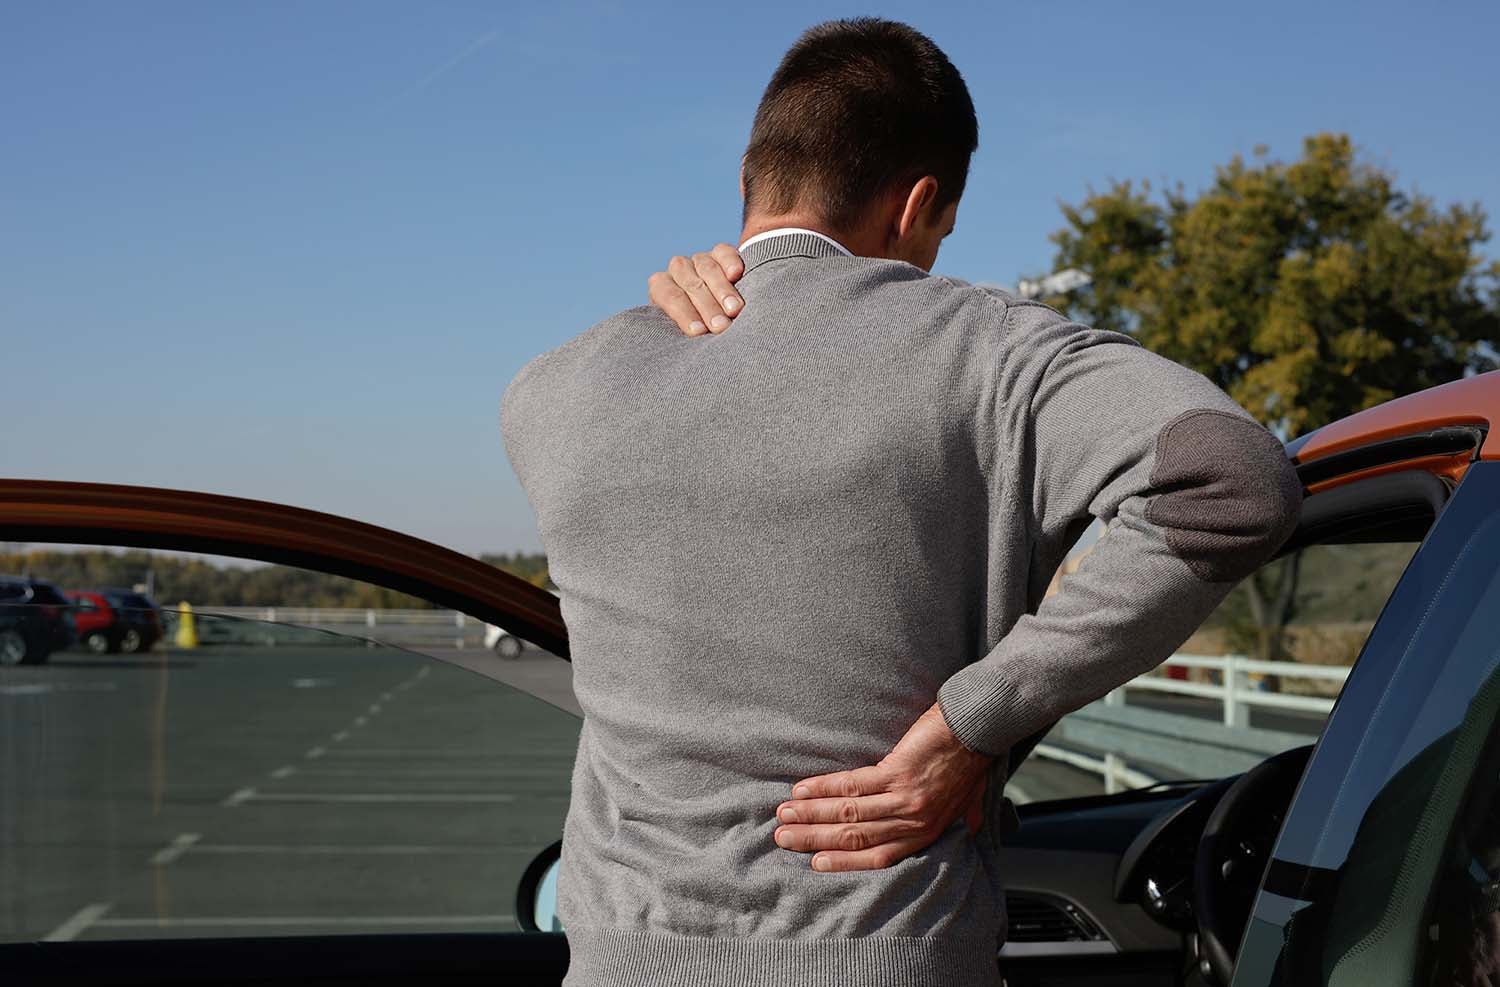 Attorney Lower Back Pain After Car Accident